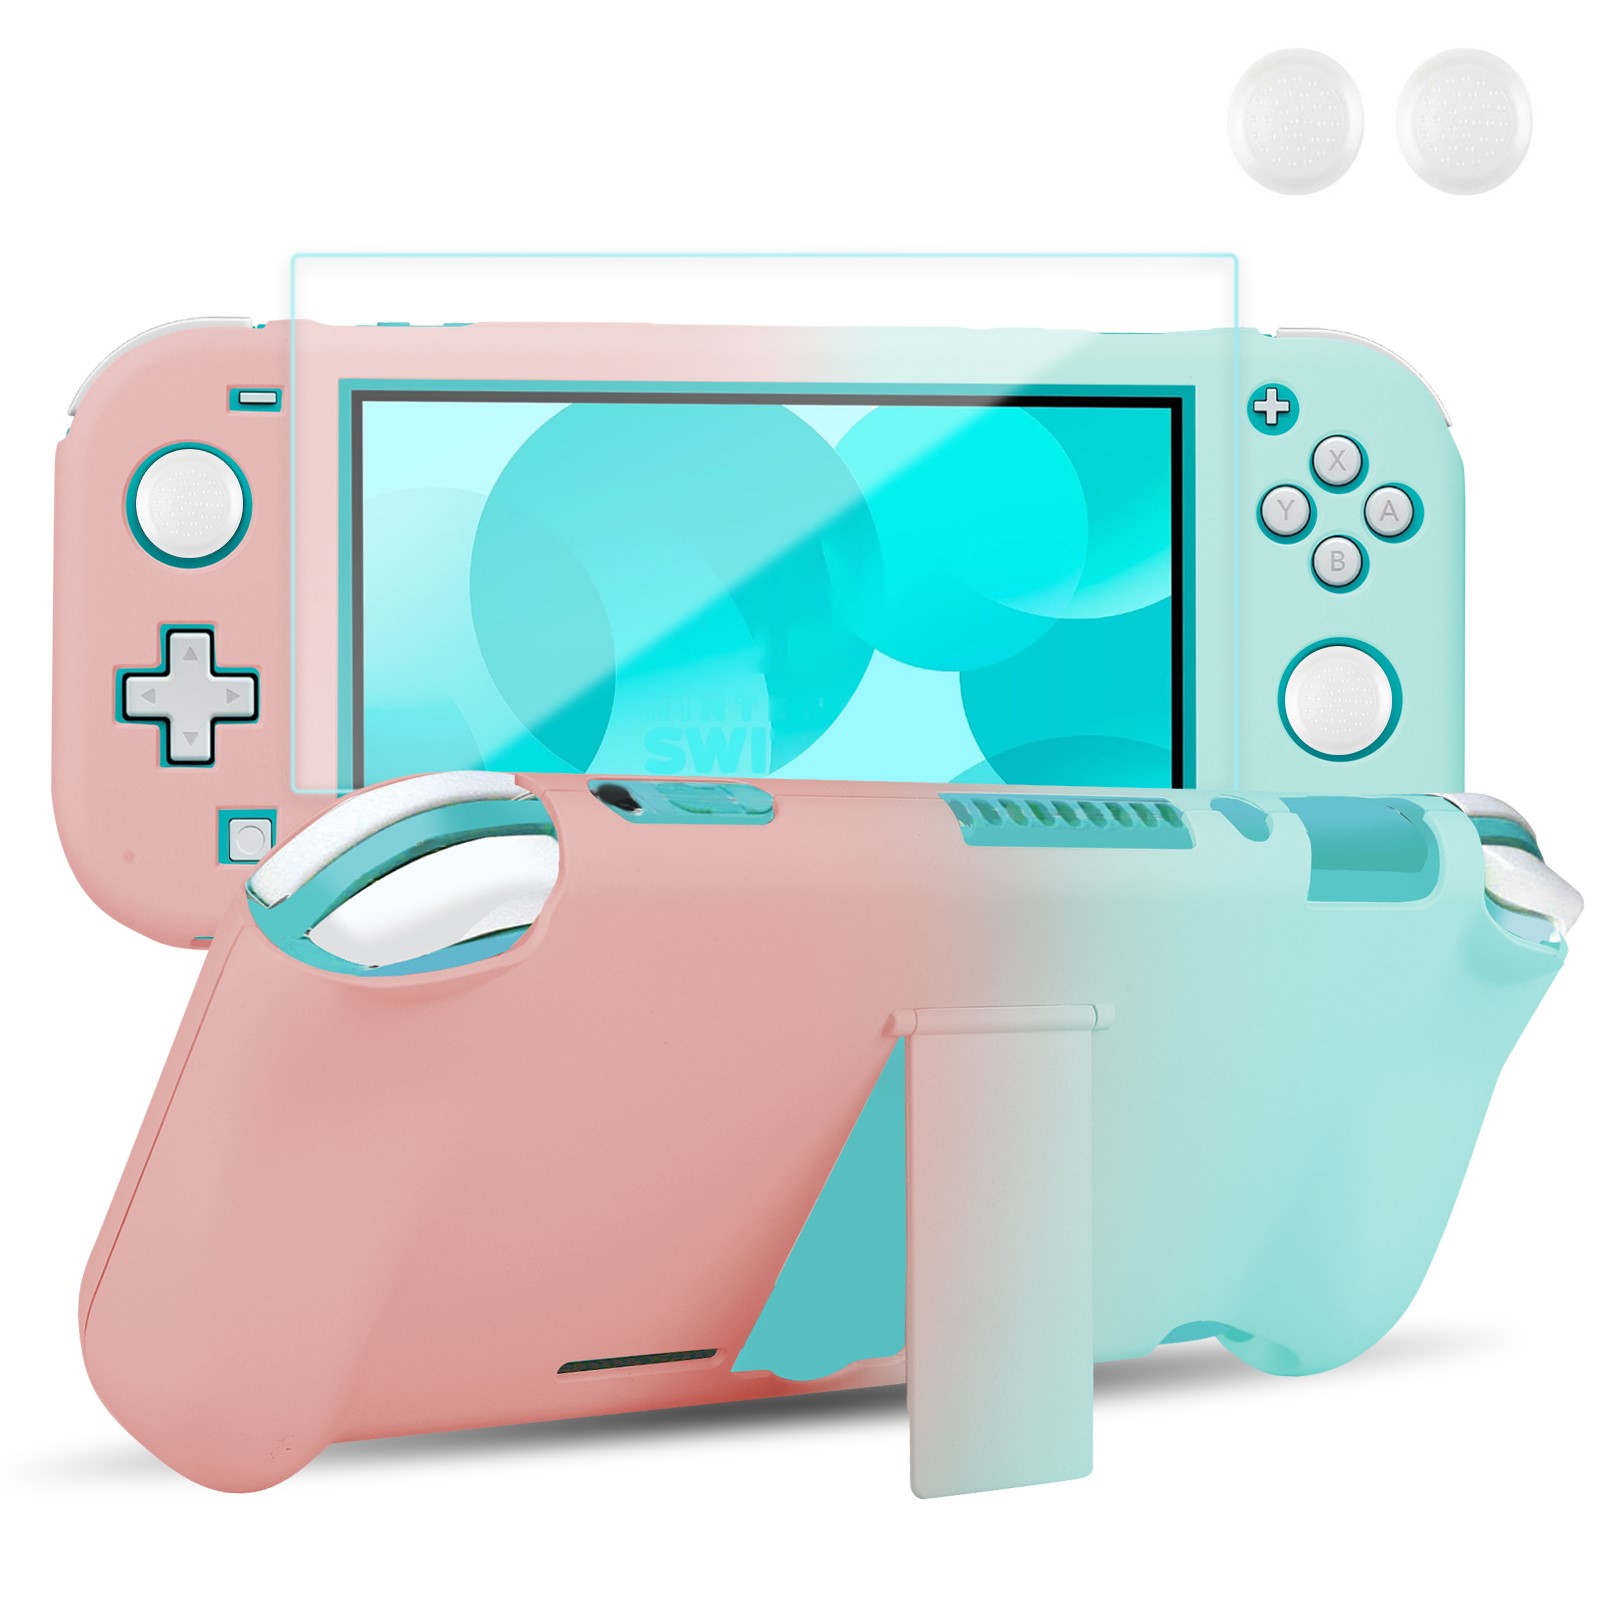 Case for Nintendo Switch Lite, Hard Shell Crystal Clear Protection Grip Non  Slip Cover for Joy-Con Controller NS Console Switch Lite Accessories